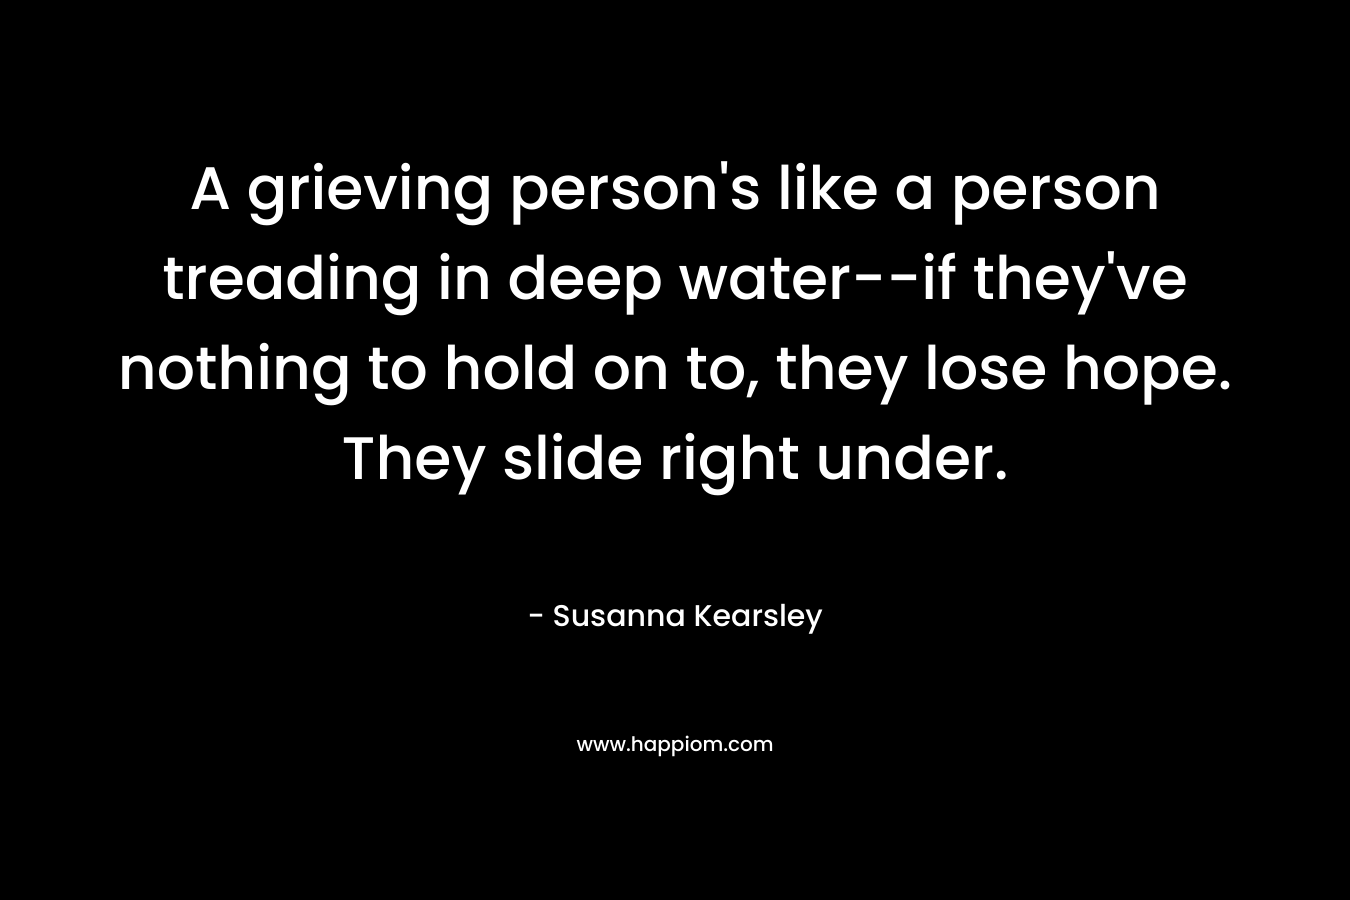 A grieving person’s like a person treading in deep water–if they’ve nothing to hold on to, they lose hope. They slide right under. – Susanna Kearsley